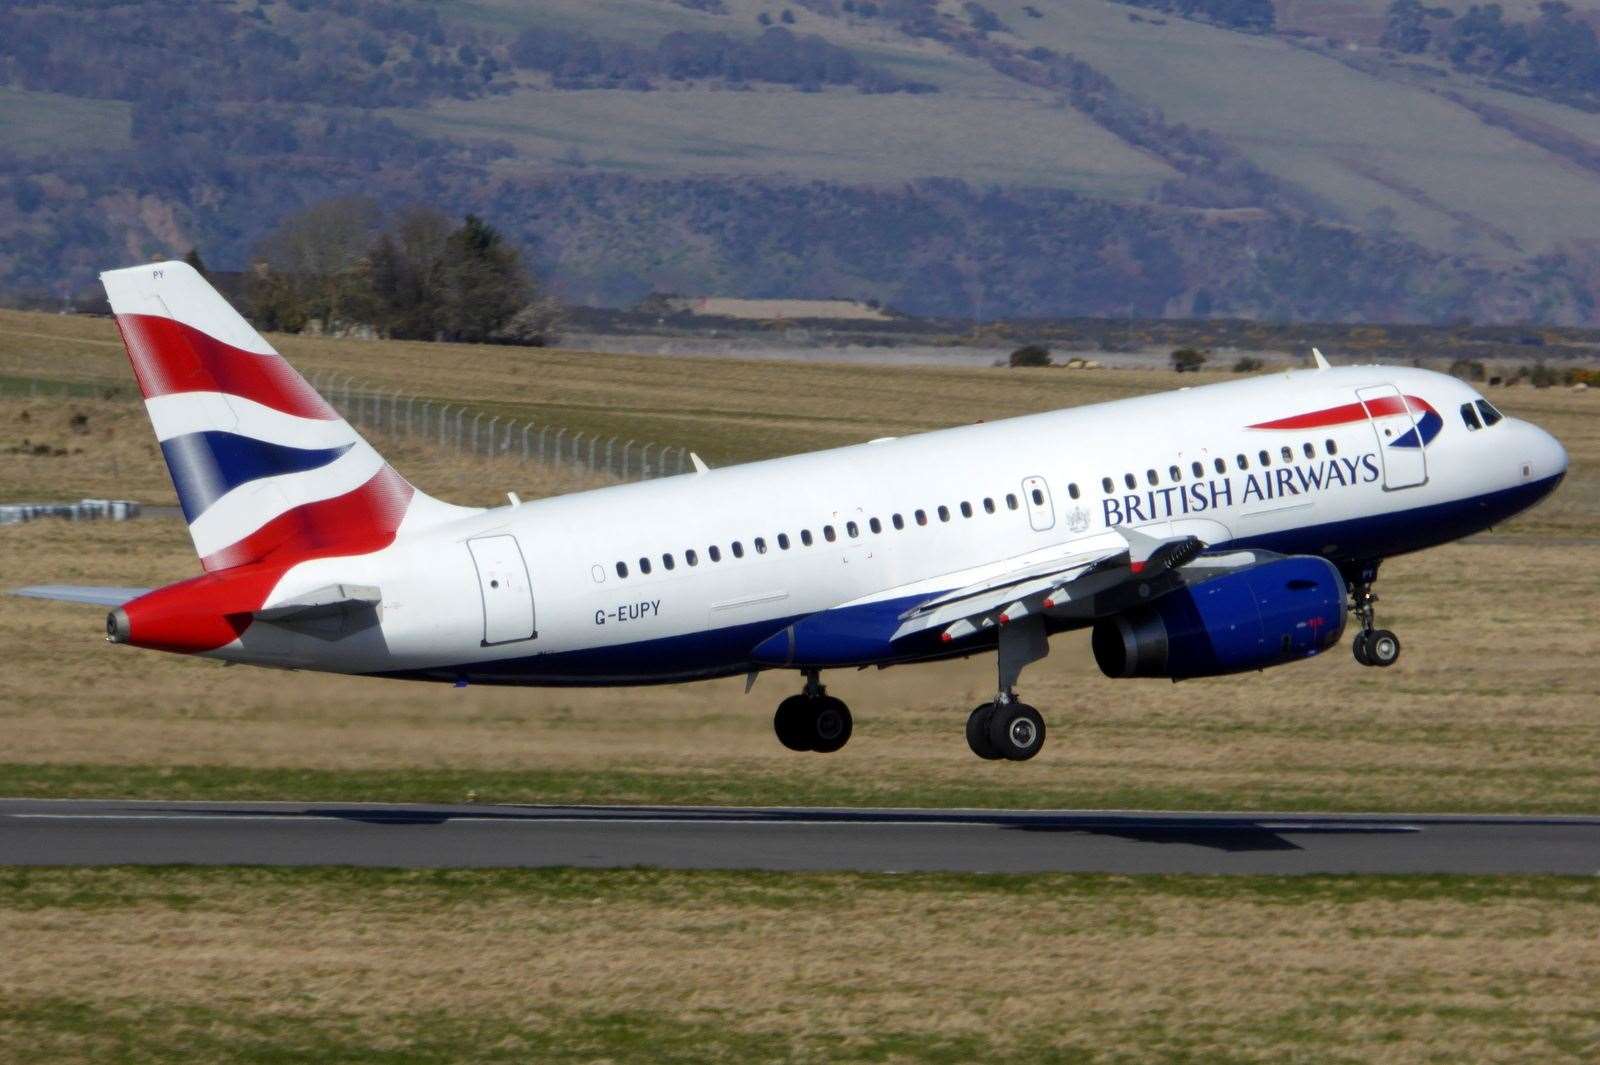 British Airways is to take part in efforts to bring UK citizens home.